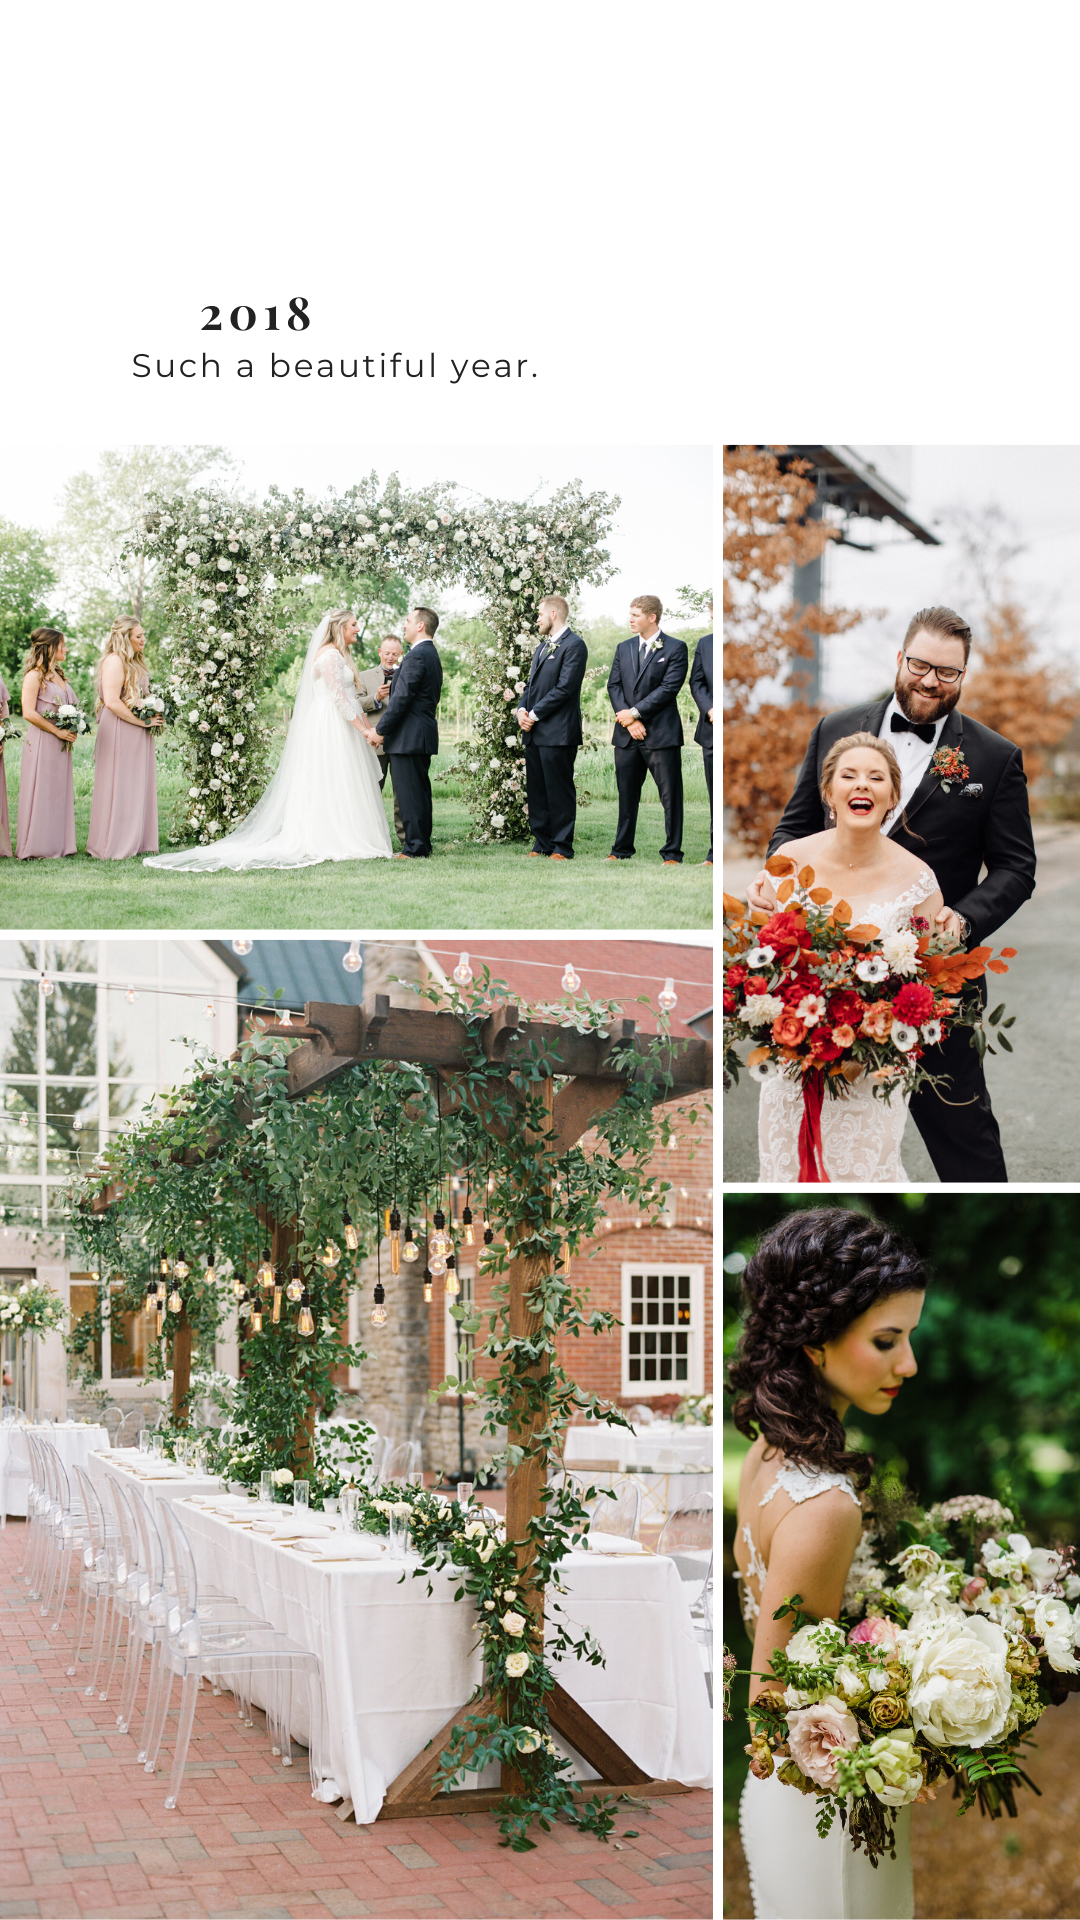 Seven Years & 200 Weddings With Rosemary & Finch Floral Design, Nashville Wedding Florist